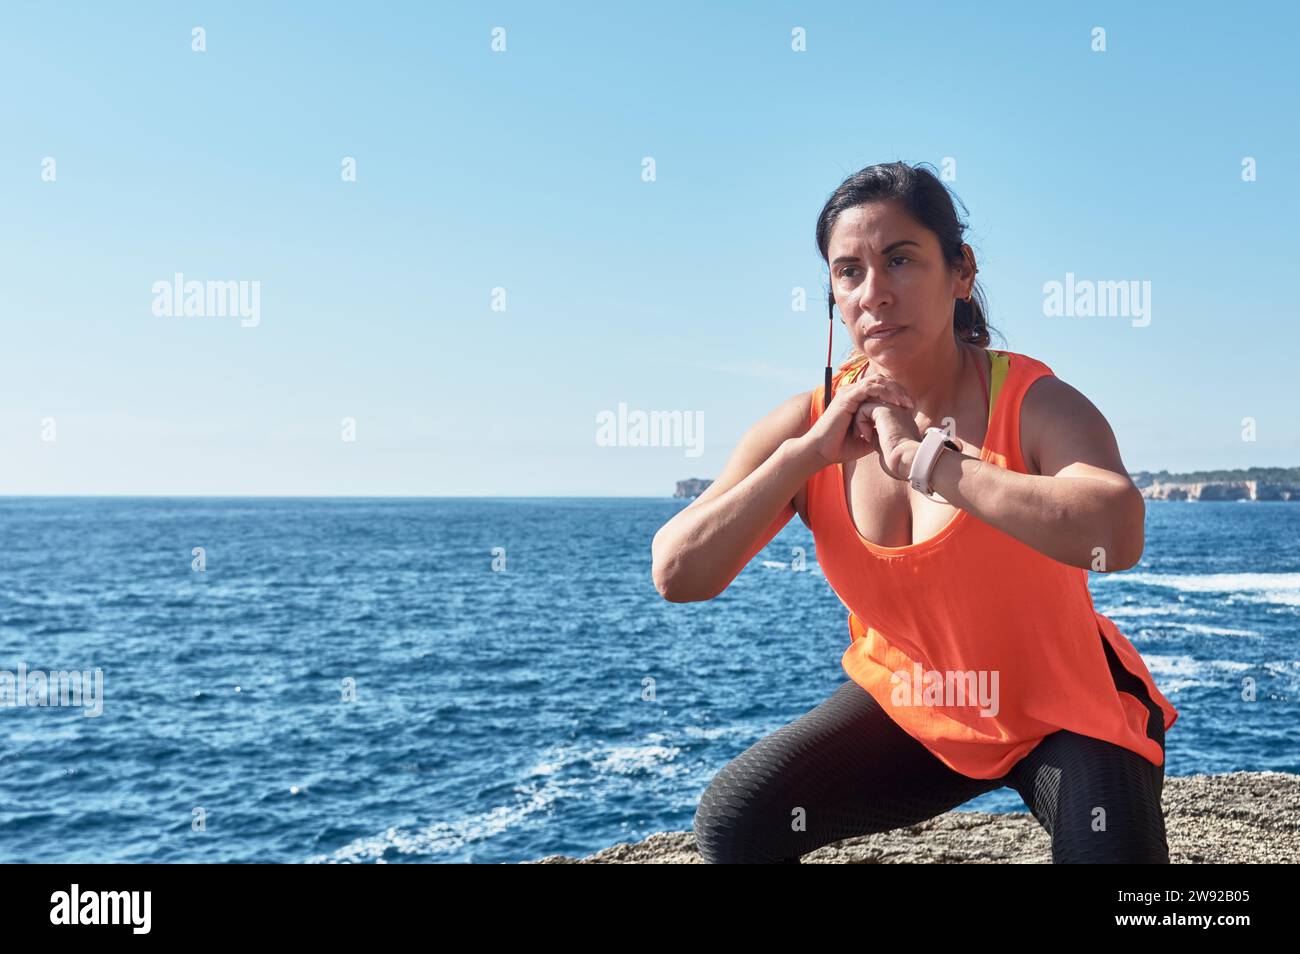 Woman in active wear doing squats by the ocean under a clear blue sky Stock Photo